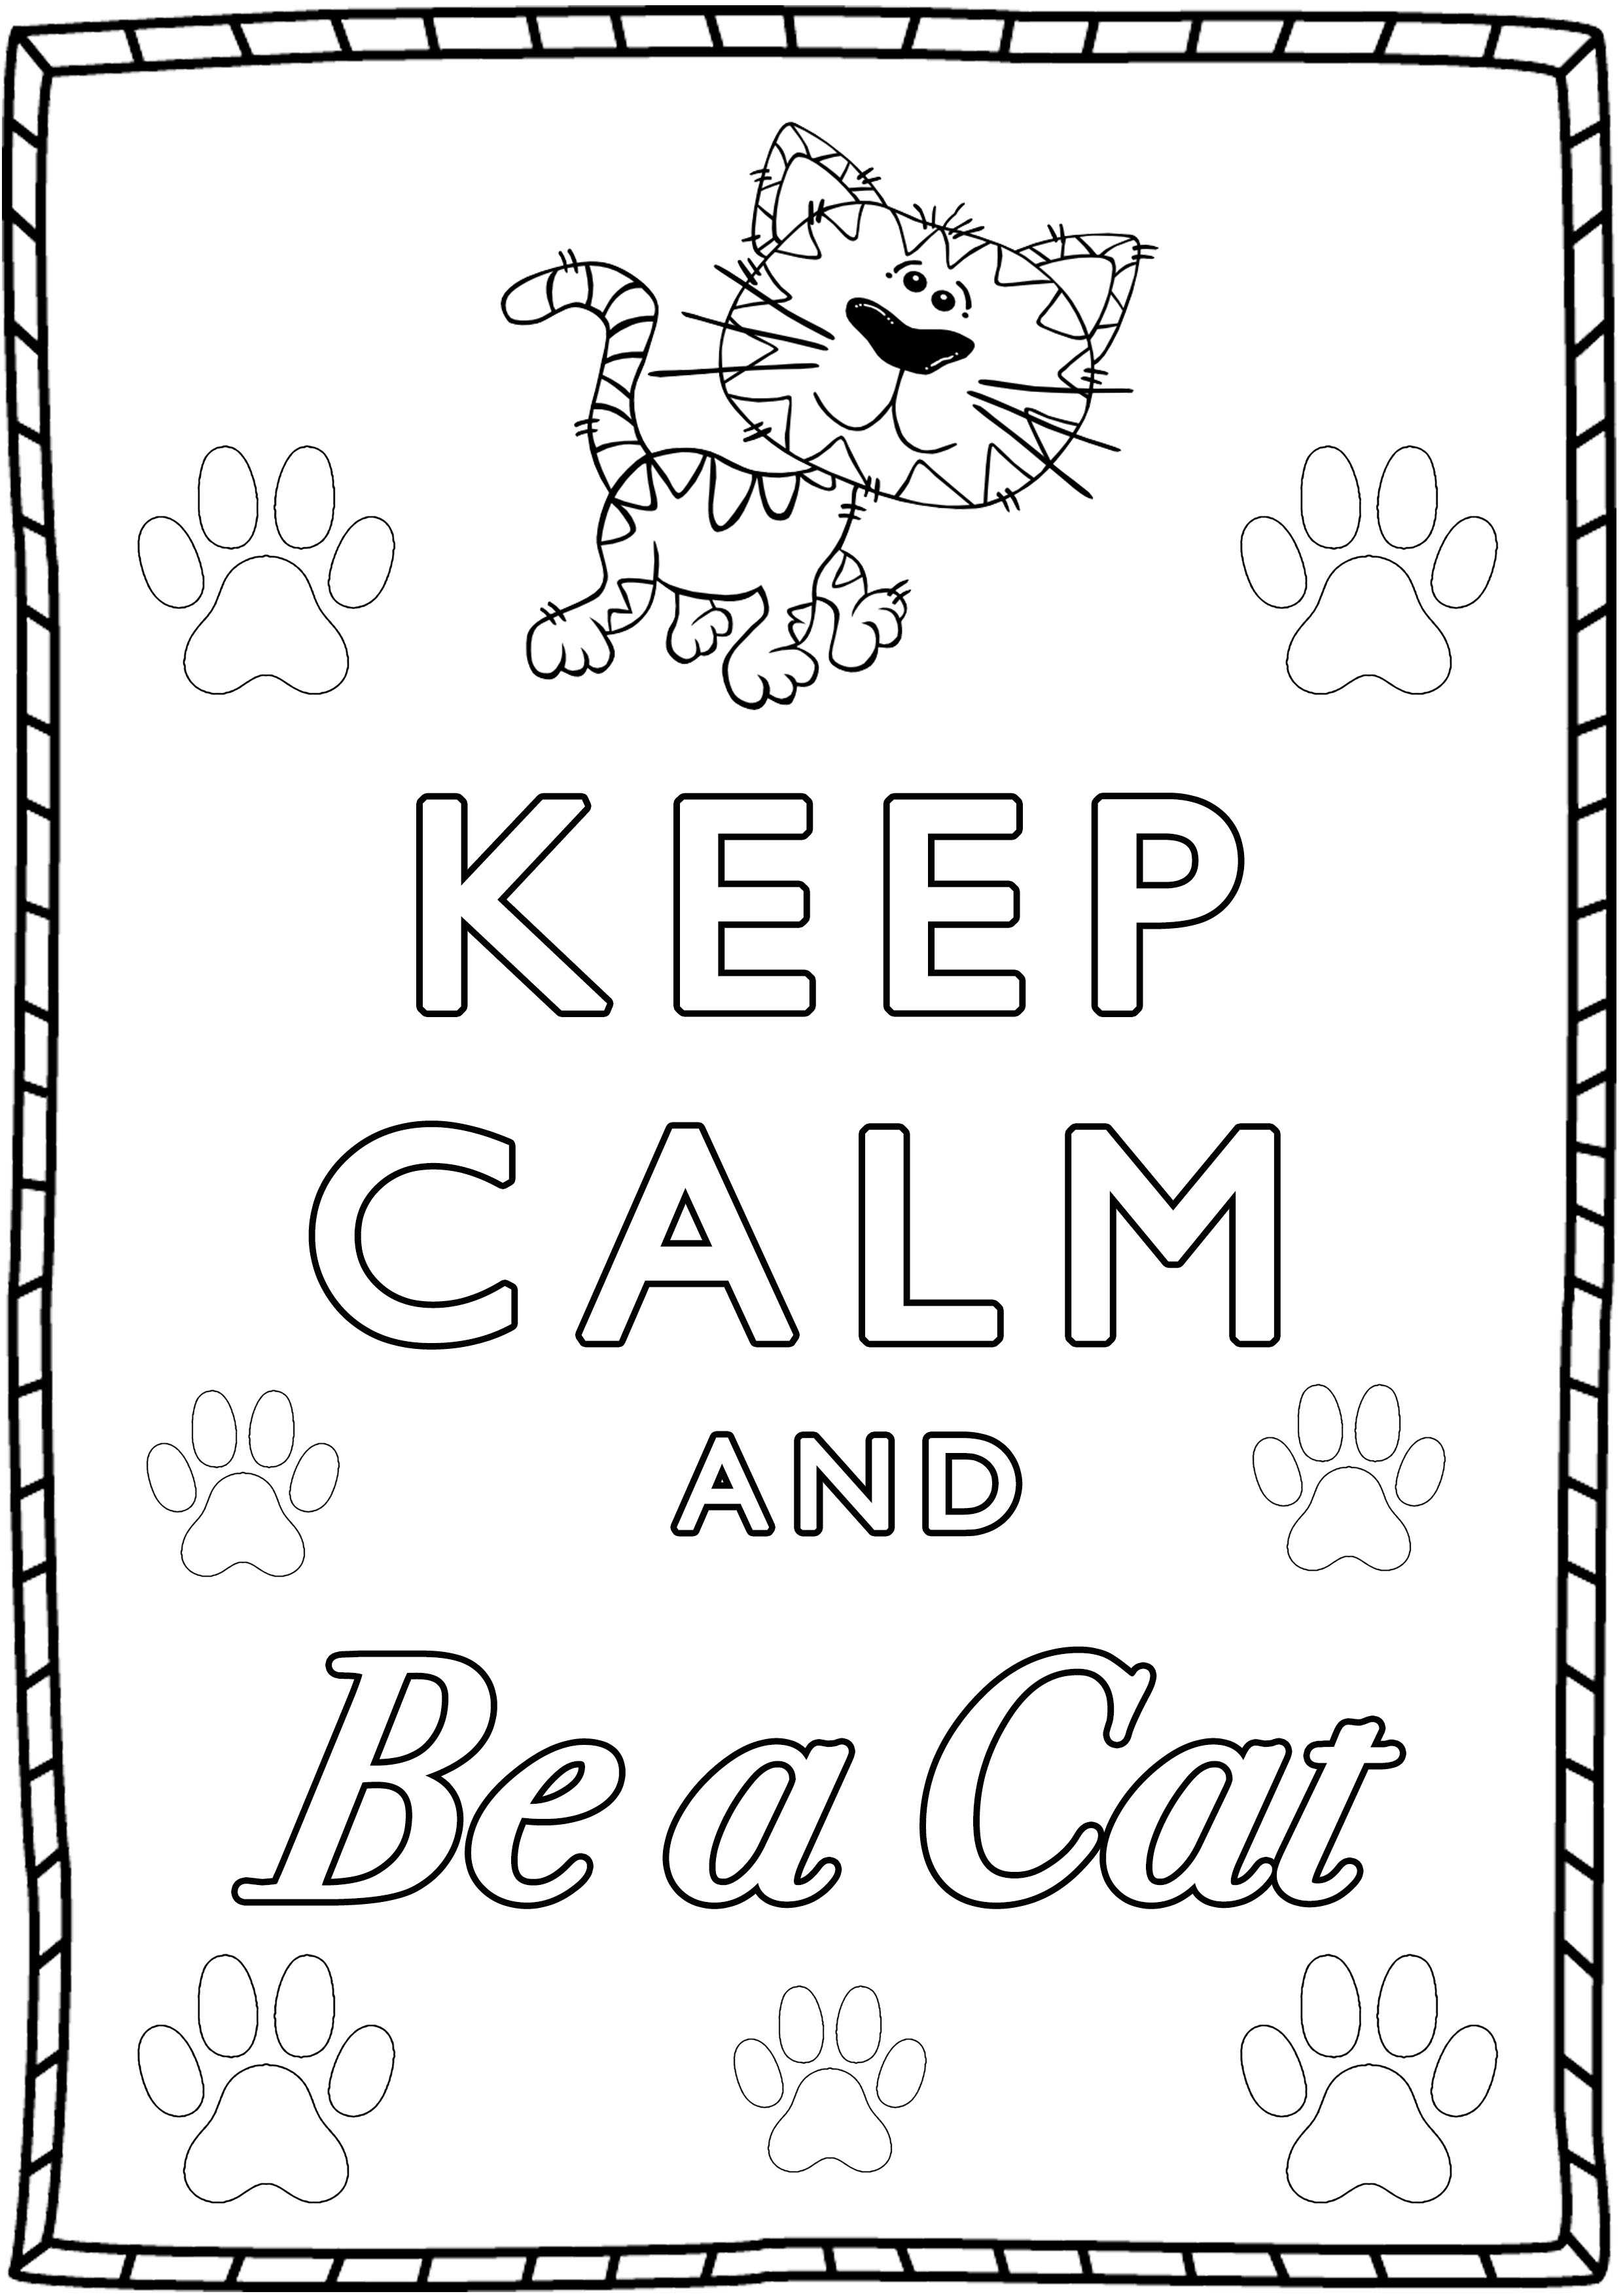 Keep calm and be a cat